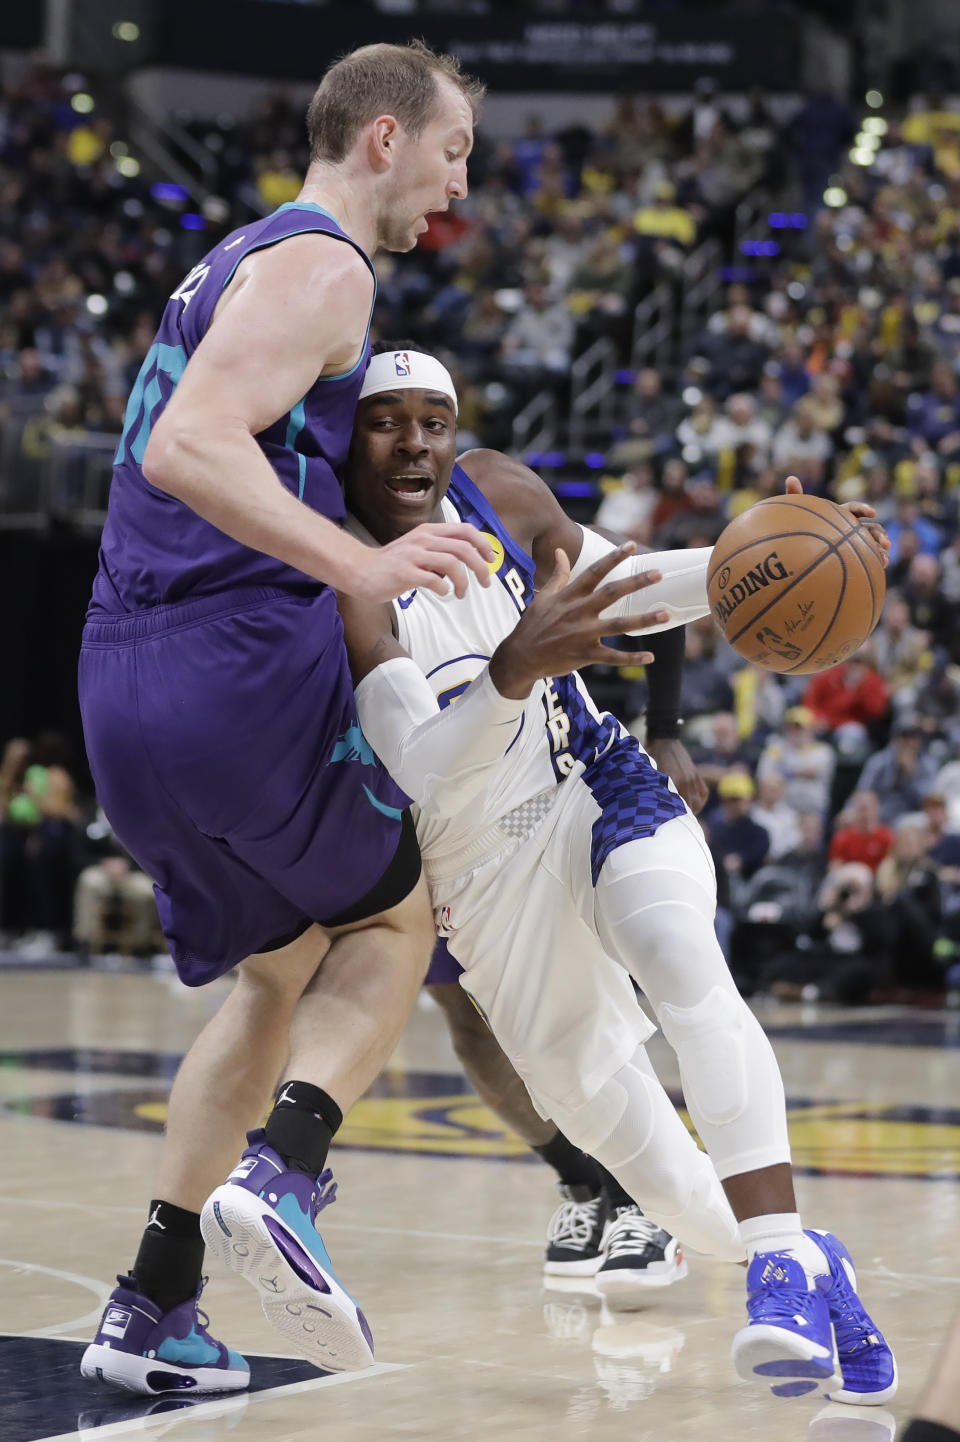 Indiana Pacers' Aaron Holiday, right, drives to the basket against Charlotte Hornets' Cody Zeller, left, during the second half of an NBA basketball game, Sunday, Dec. 15, 2019, in Indianapolis.(AP Photo/Darron Cummings)